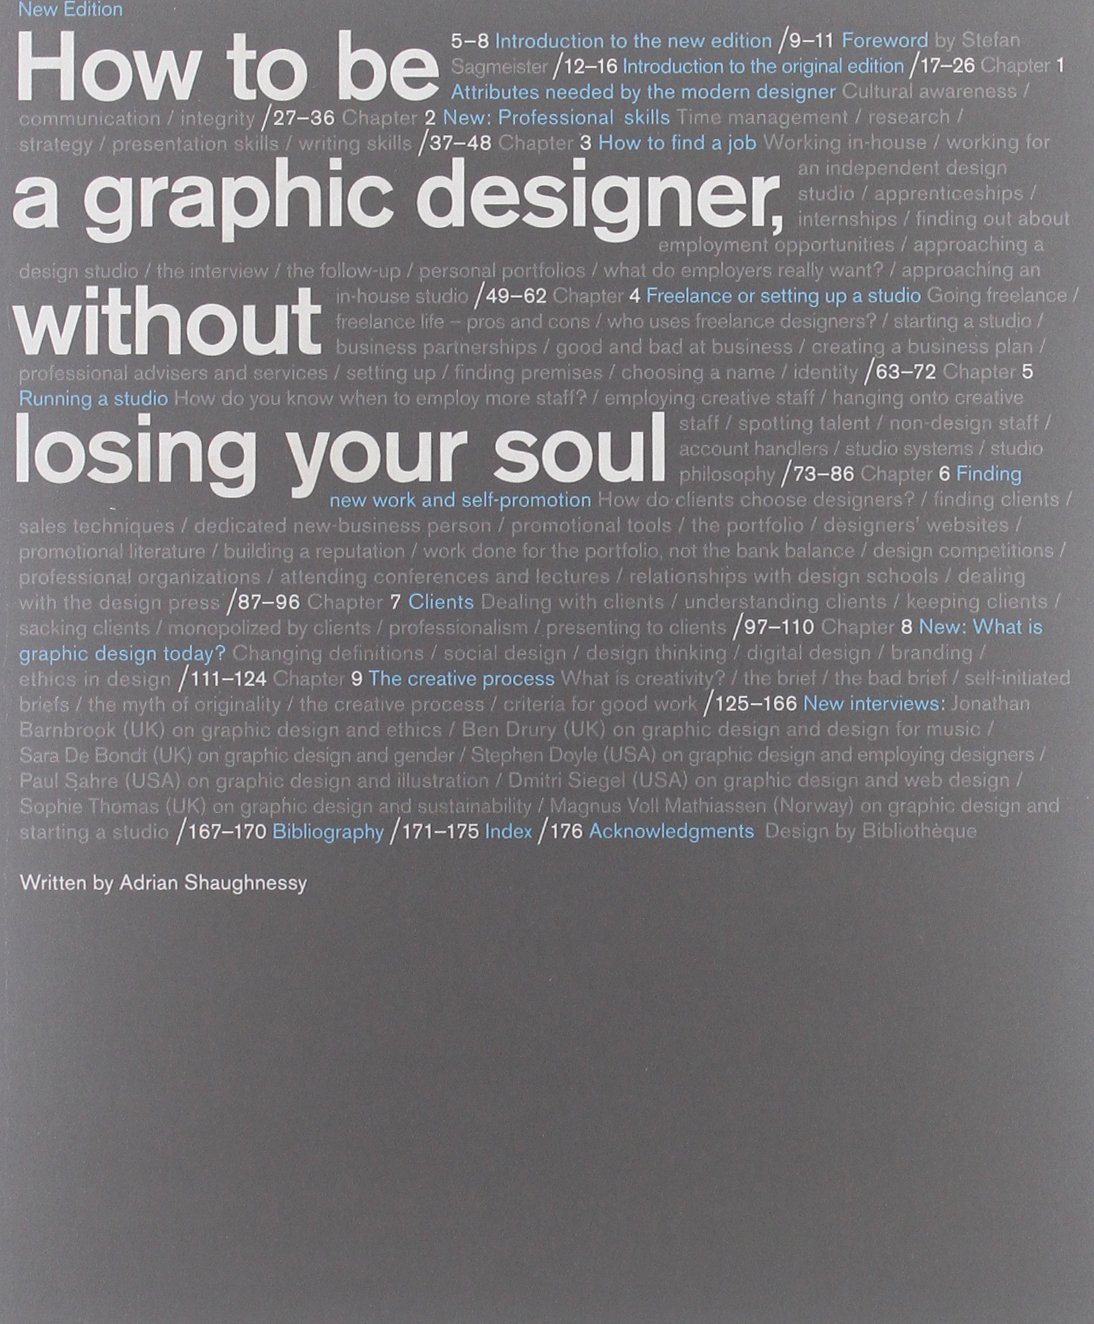 How to be a Graphic Designer without Losing Your Soul